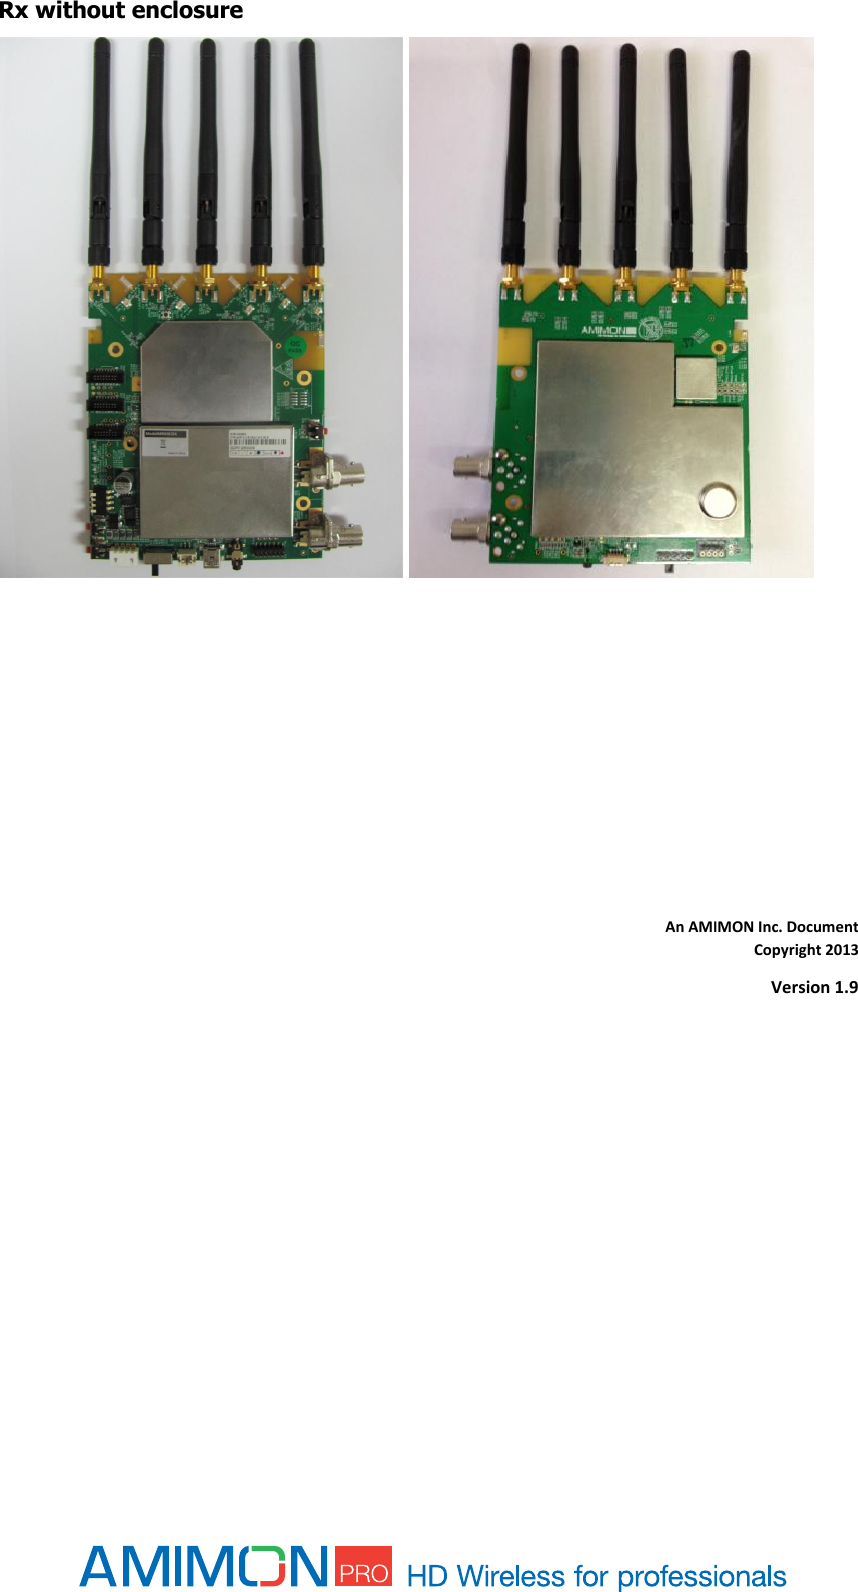  Rx without enclosure       An AMIMON Inc. Document  Copyright 2013 Version 1.9    